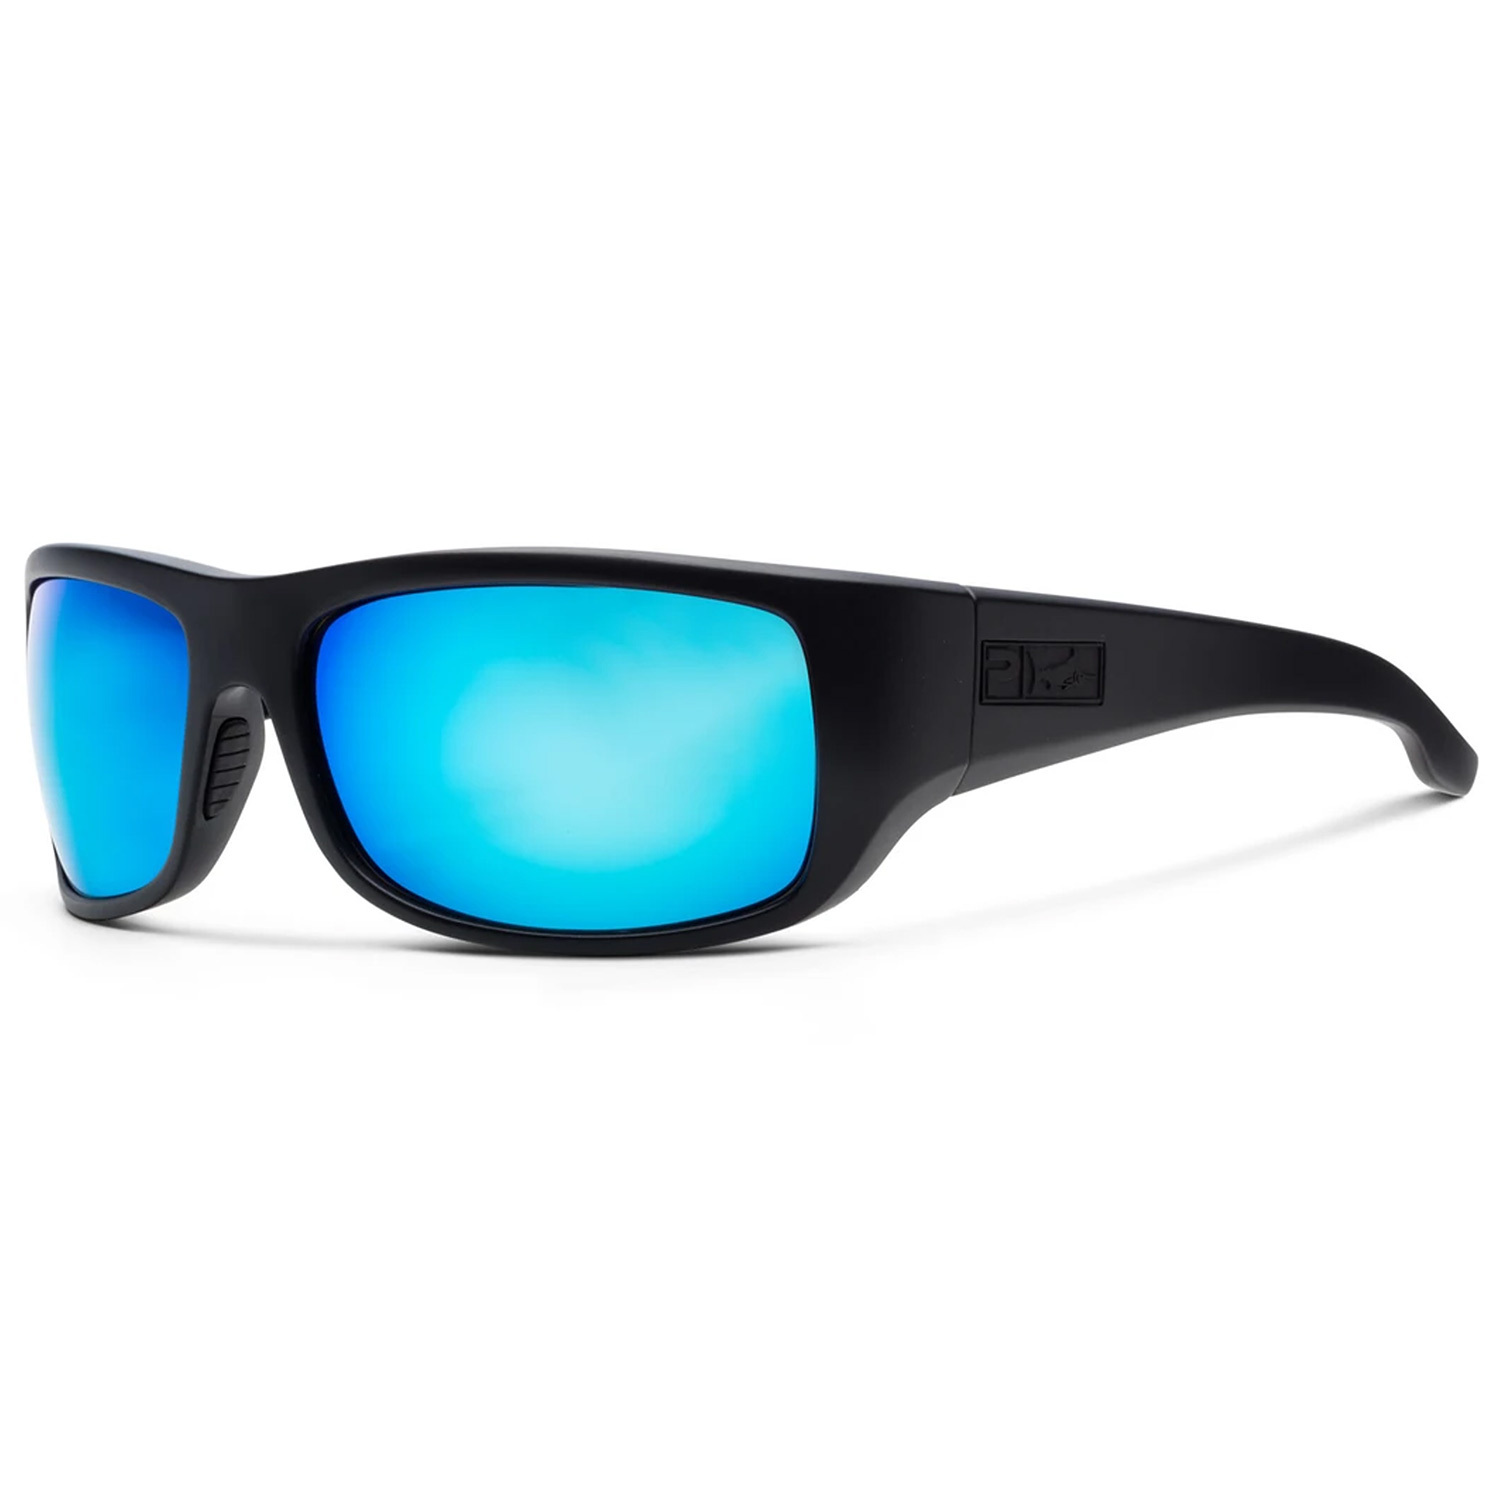  Filthy Anglers Pleasant Women's Polarized Fishing